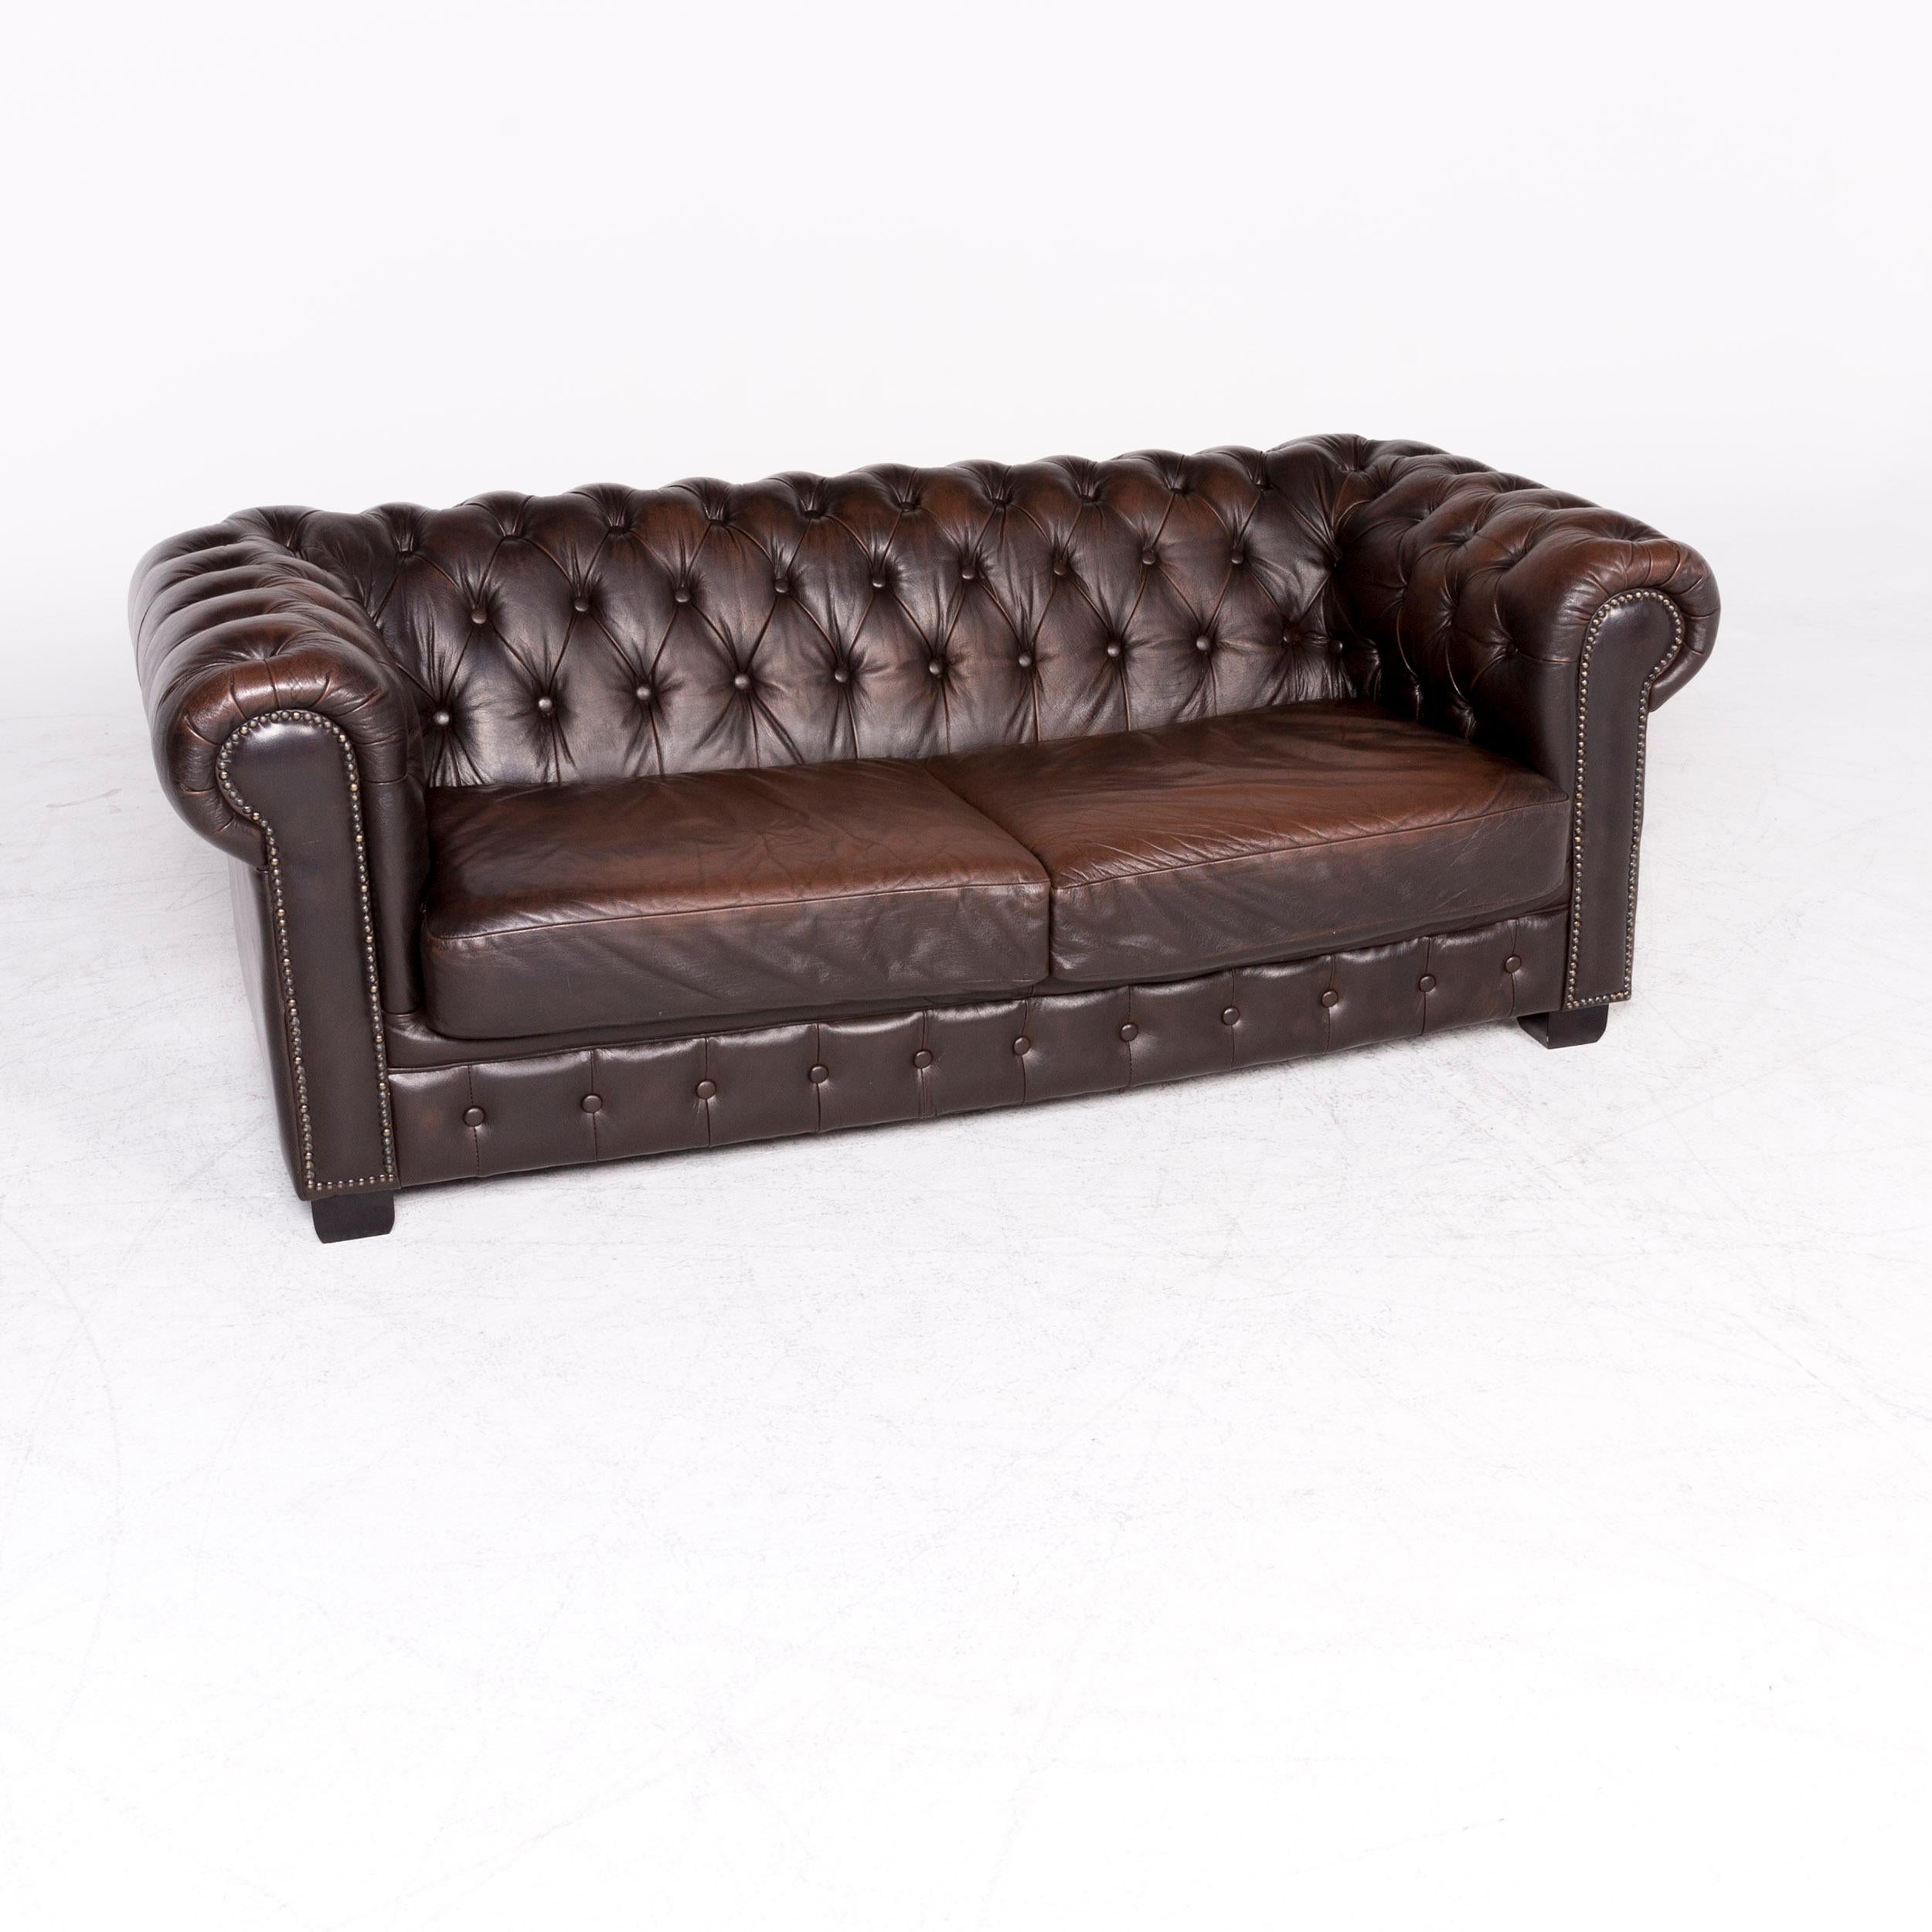 We bring to you a Chesterfield leather sofa brown genuine leather three-seat couch vintage retro.

Product measurements in centimeters:

Depth 102
Width 200
Height 73
Seat-height 46
Rest-height 73
Seat-depth 60
Seat-width 138
Back-height